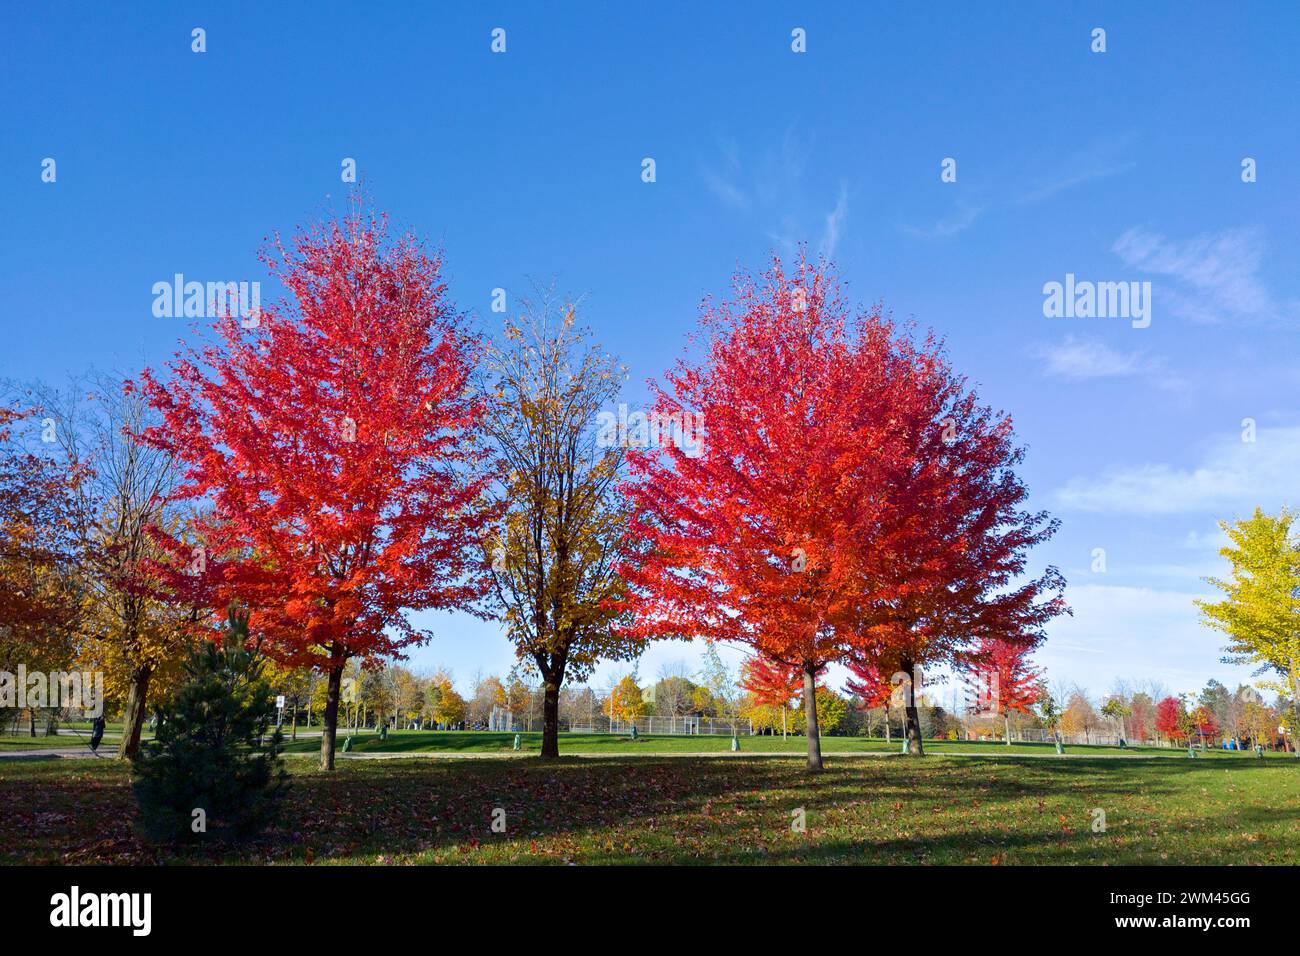 Red maple trees in the park with blue sky background Stock Photo